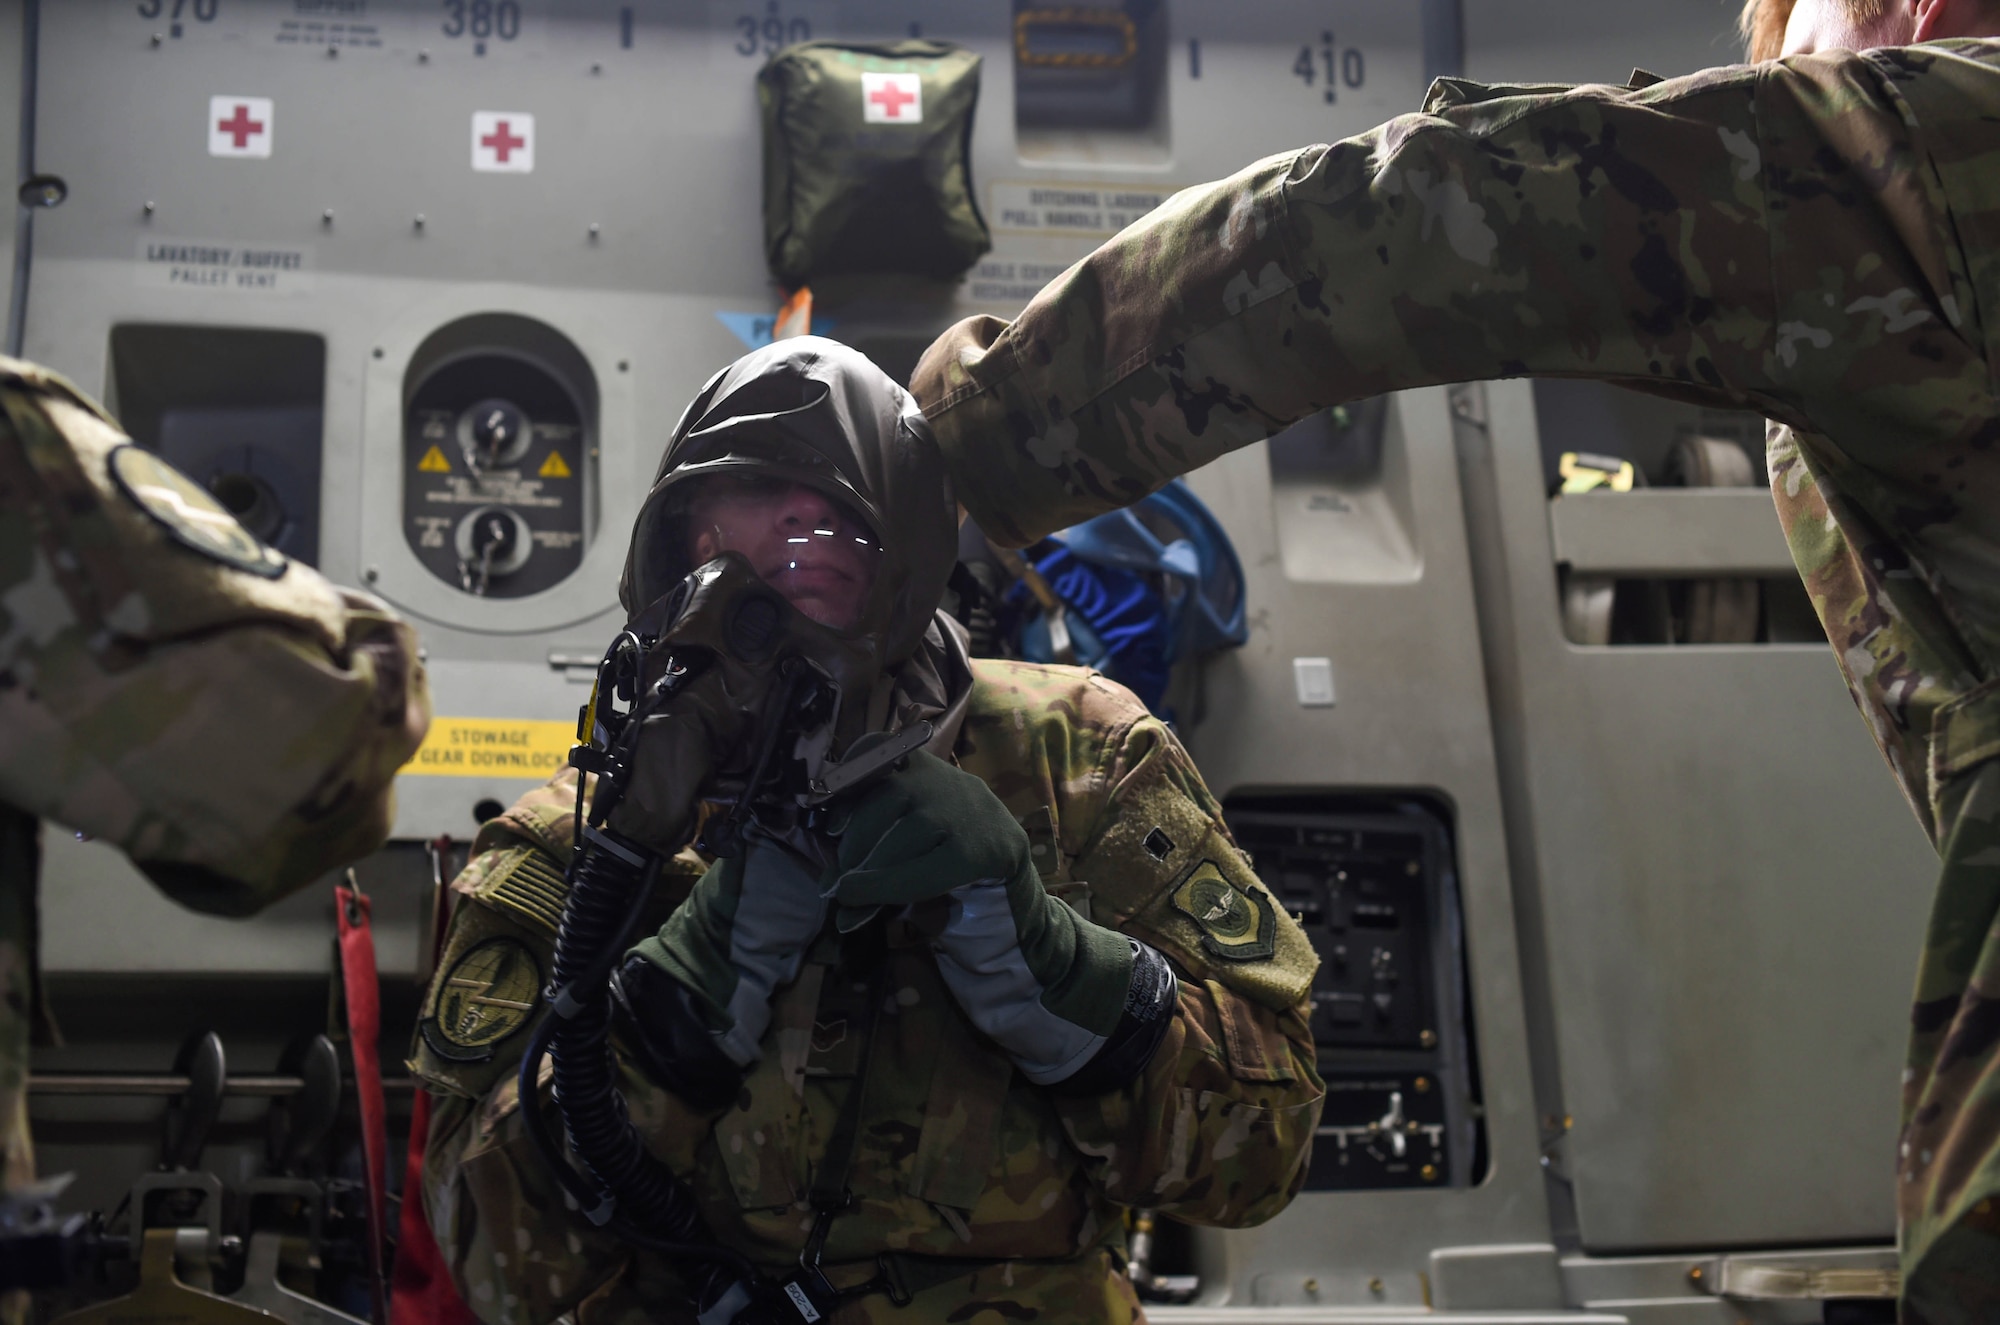 Staff Sgt. Matthew Duck, 7th Airlift Squadron loadmaster, removes an aircrew eye and respiratory protection system while flying in a C-17 Globemaster III during Exercise Rainier War near Moses Lake, Wash., June 6, 2018. The purpose of exercise was to highlight the C-17’s capabilities to perform the Air Force’s core competencies of rapid global mobility and precision engagement. (U.S. Air Force photo by Senior Airman Tryphena Mayhugh)